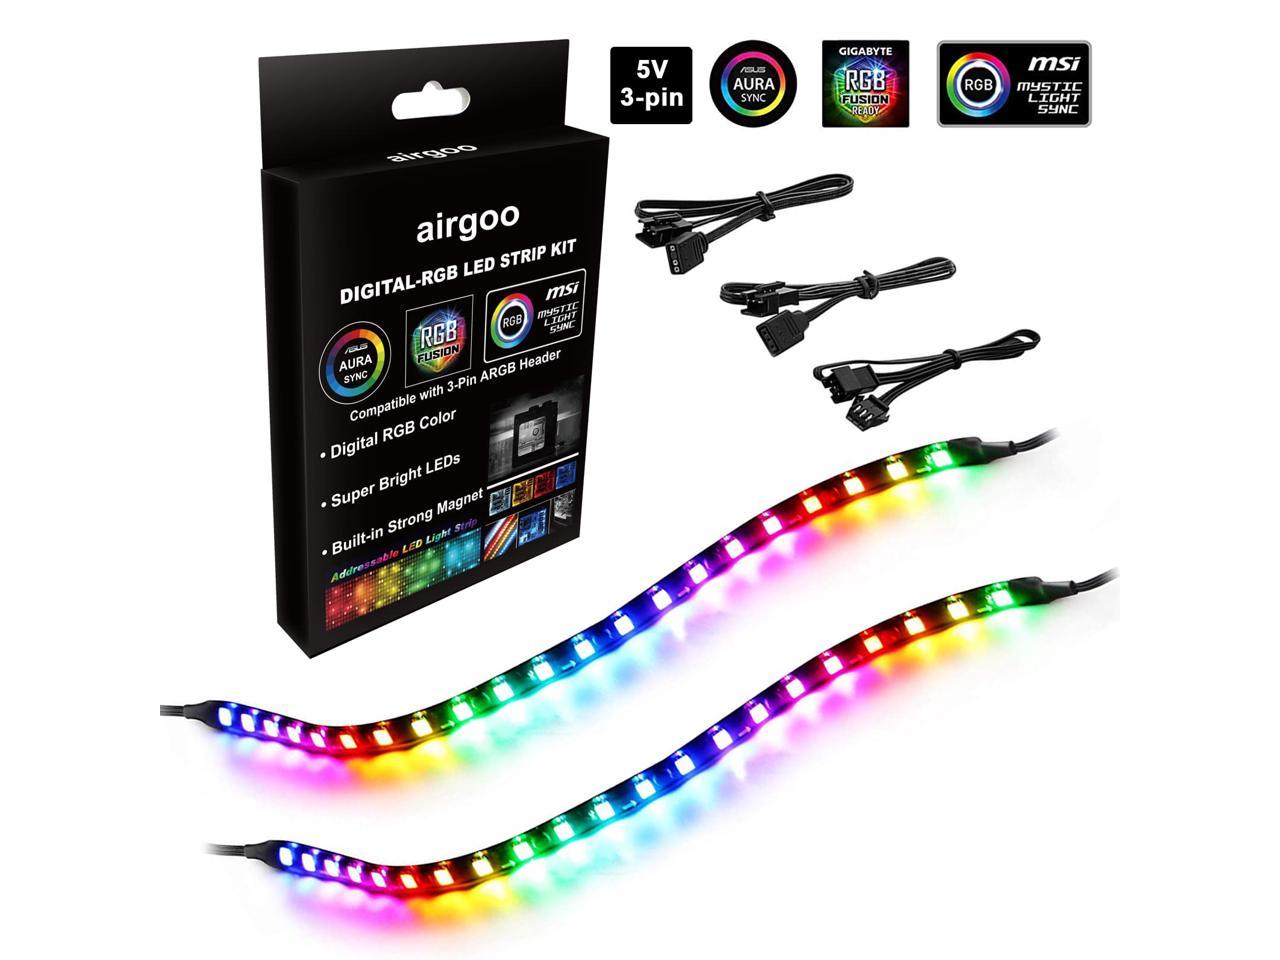 heilig altijd opbouwen Airgoo Addressable RGB PC LED Light Strips, 2x13.8in WS2812 RGBIC Rainbow  Magnetic ARGB Strip for PC Case Lighting, for 5V 3-pin ASUS Aura SYNC,  Gigabyte RGB Fusion, MSI Mystic Light Sync Motherboard -